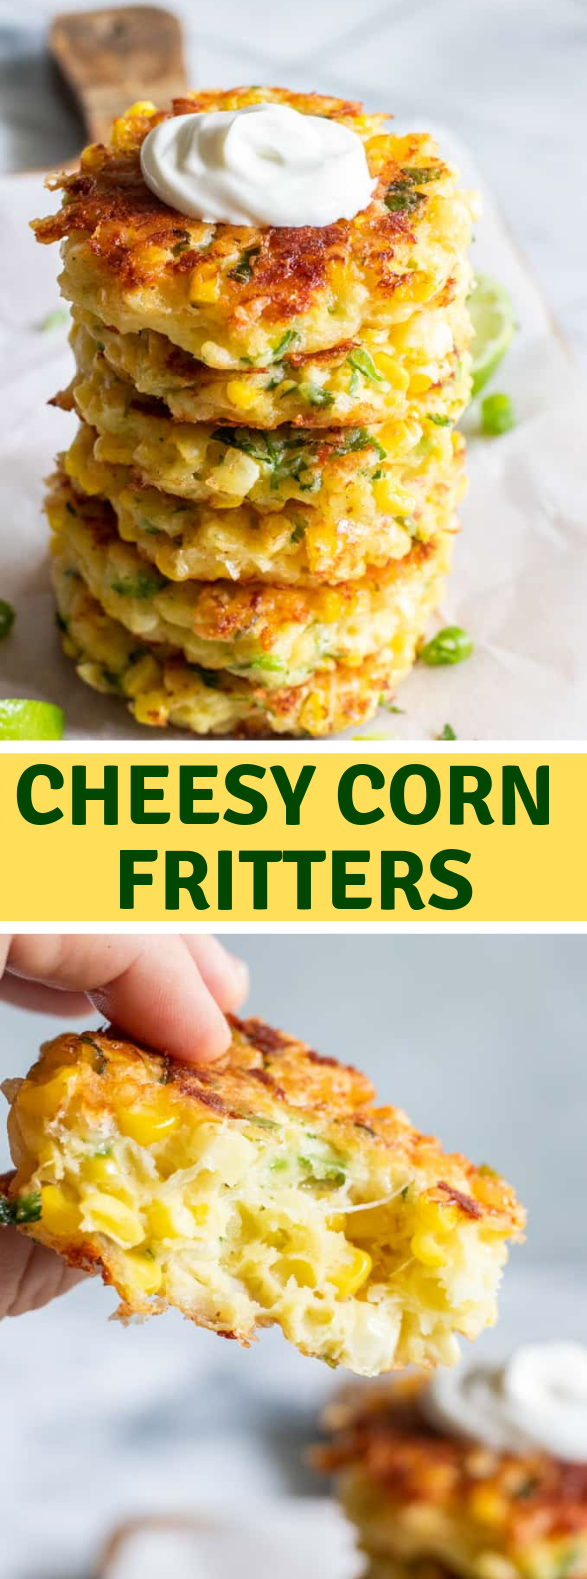 Cheesy Corn Fritters #easymeal #summer